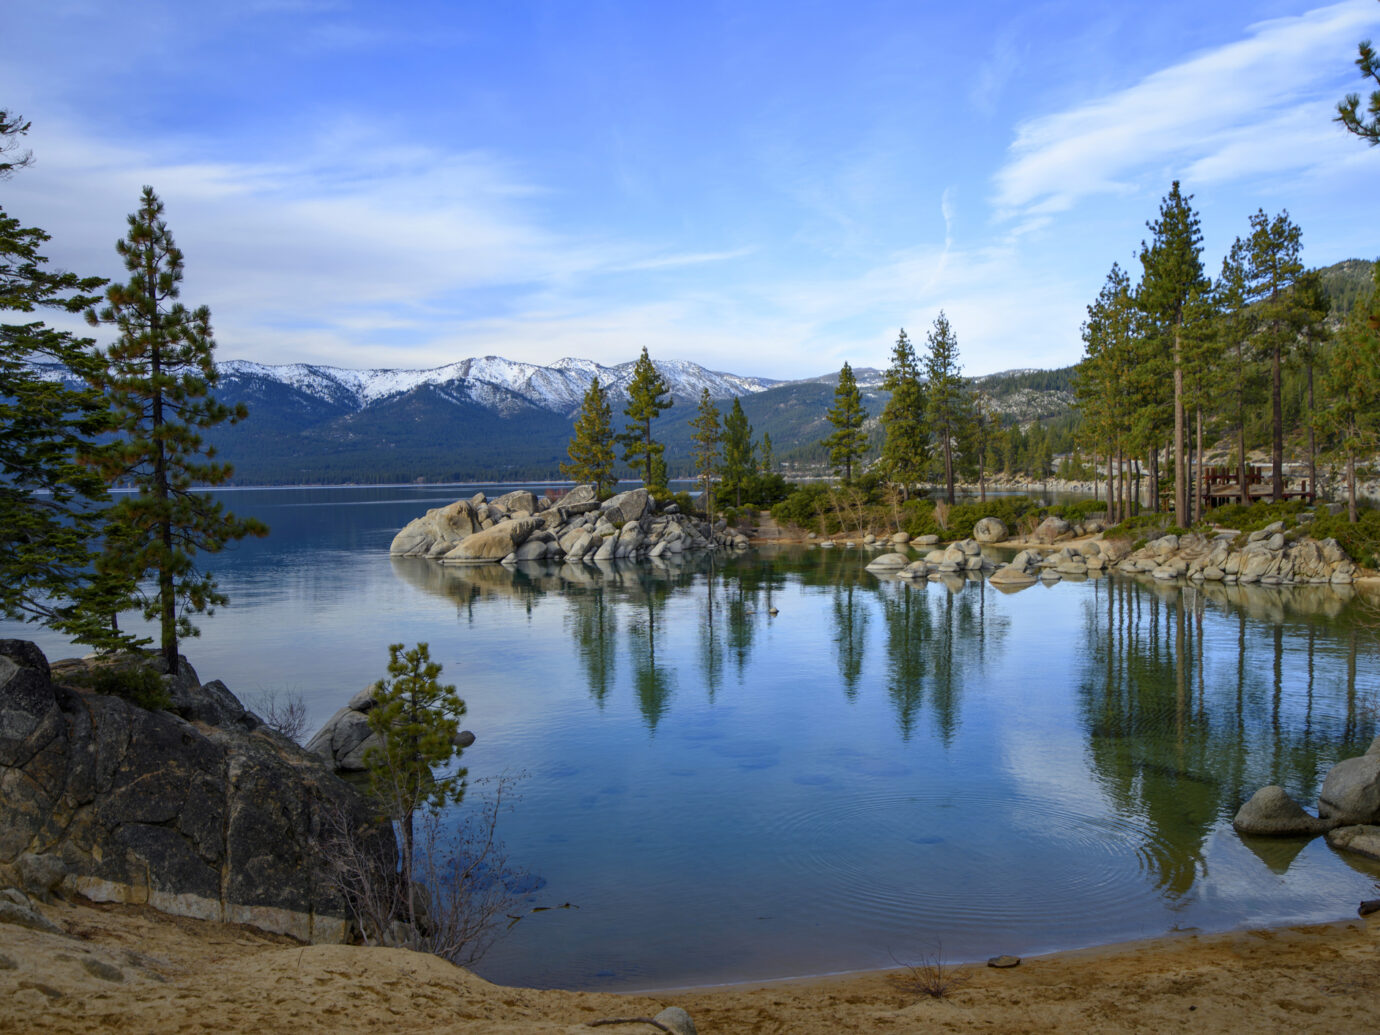 Lake Tahoe with snow capped mountain